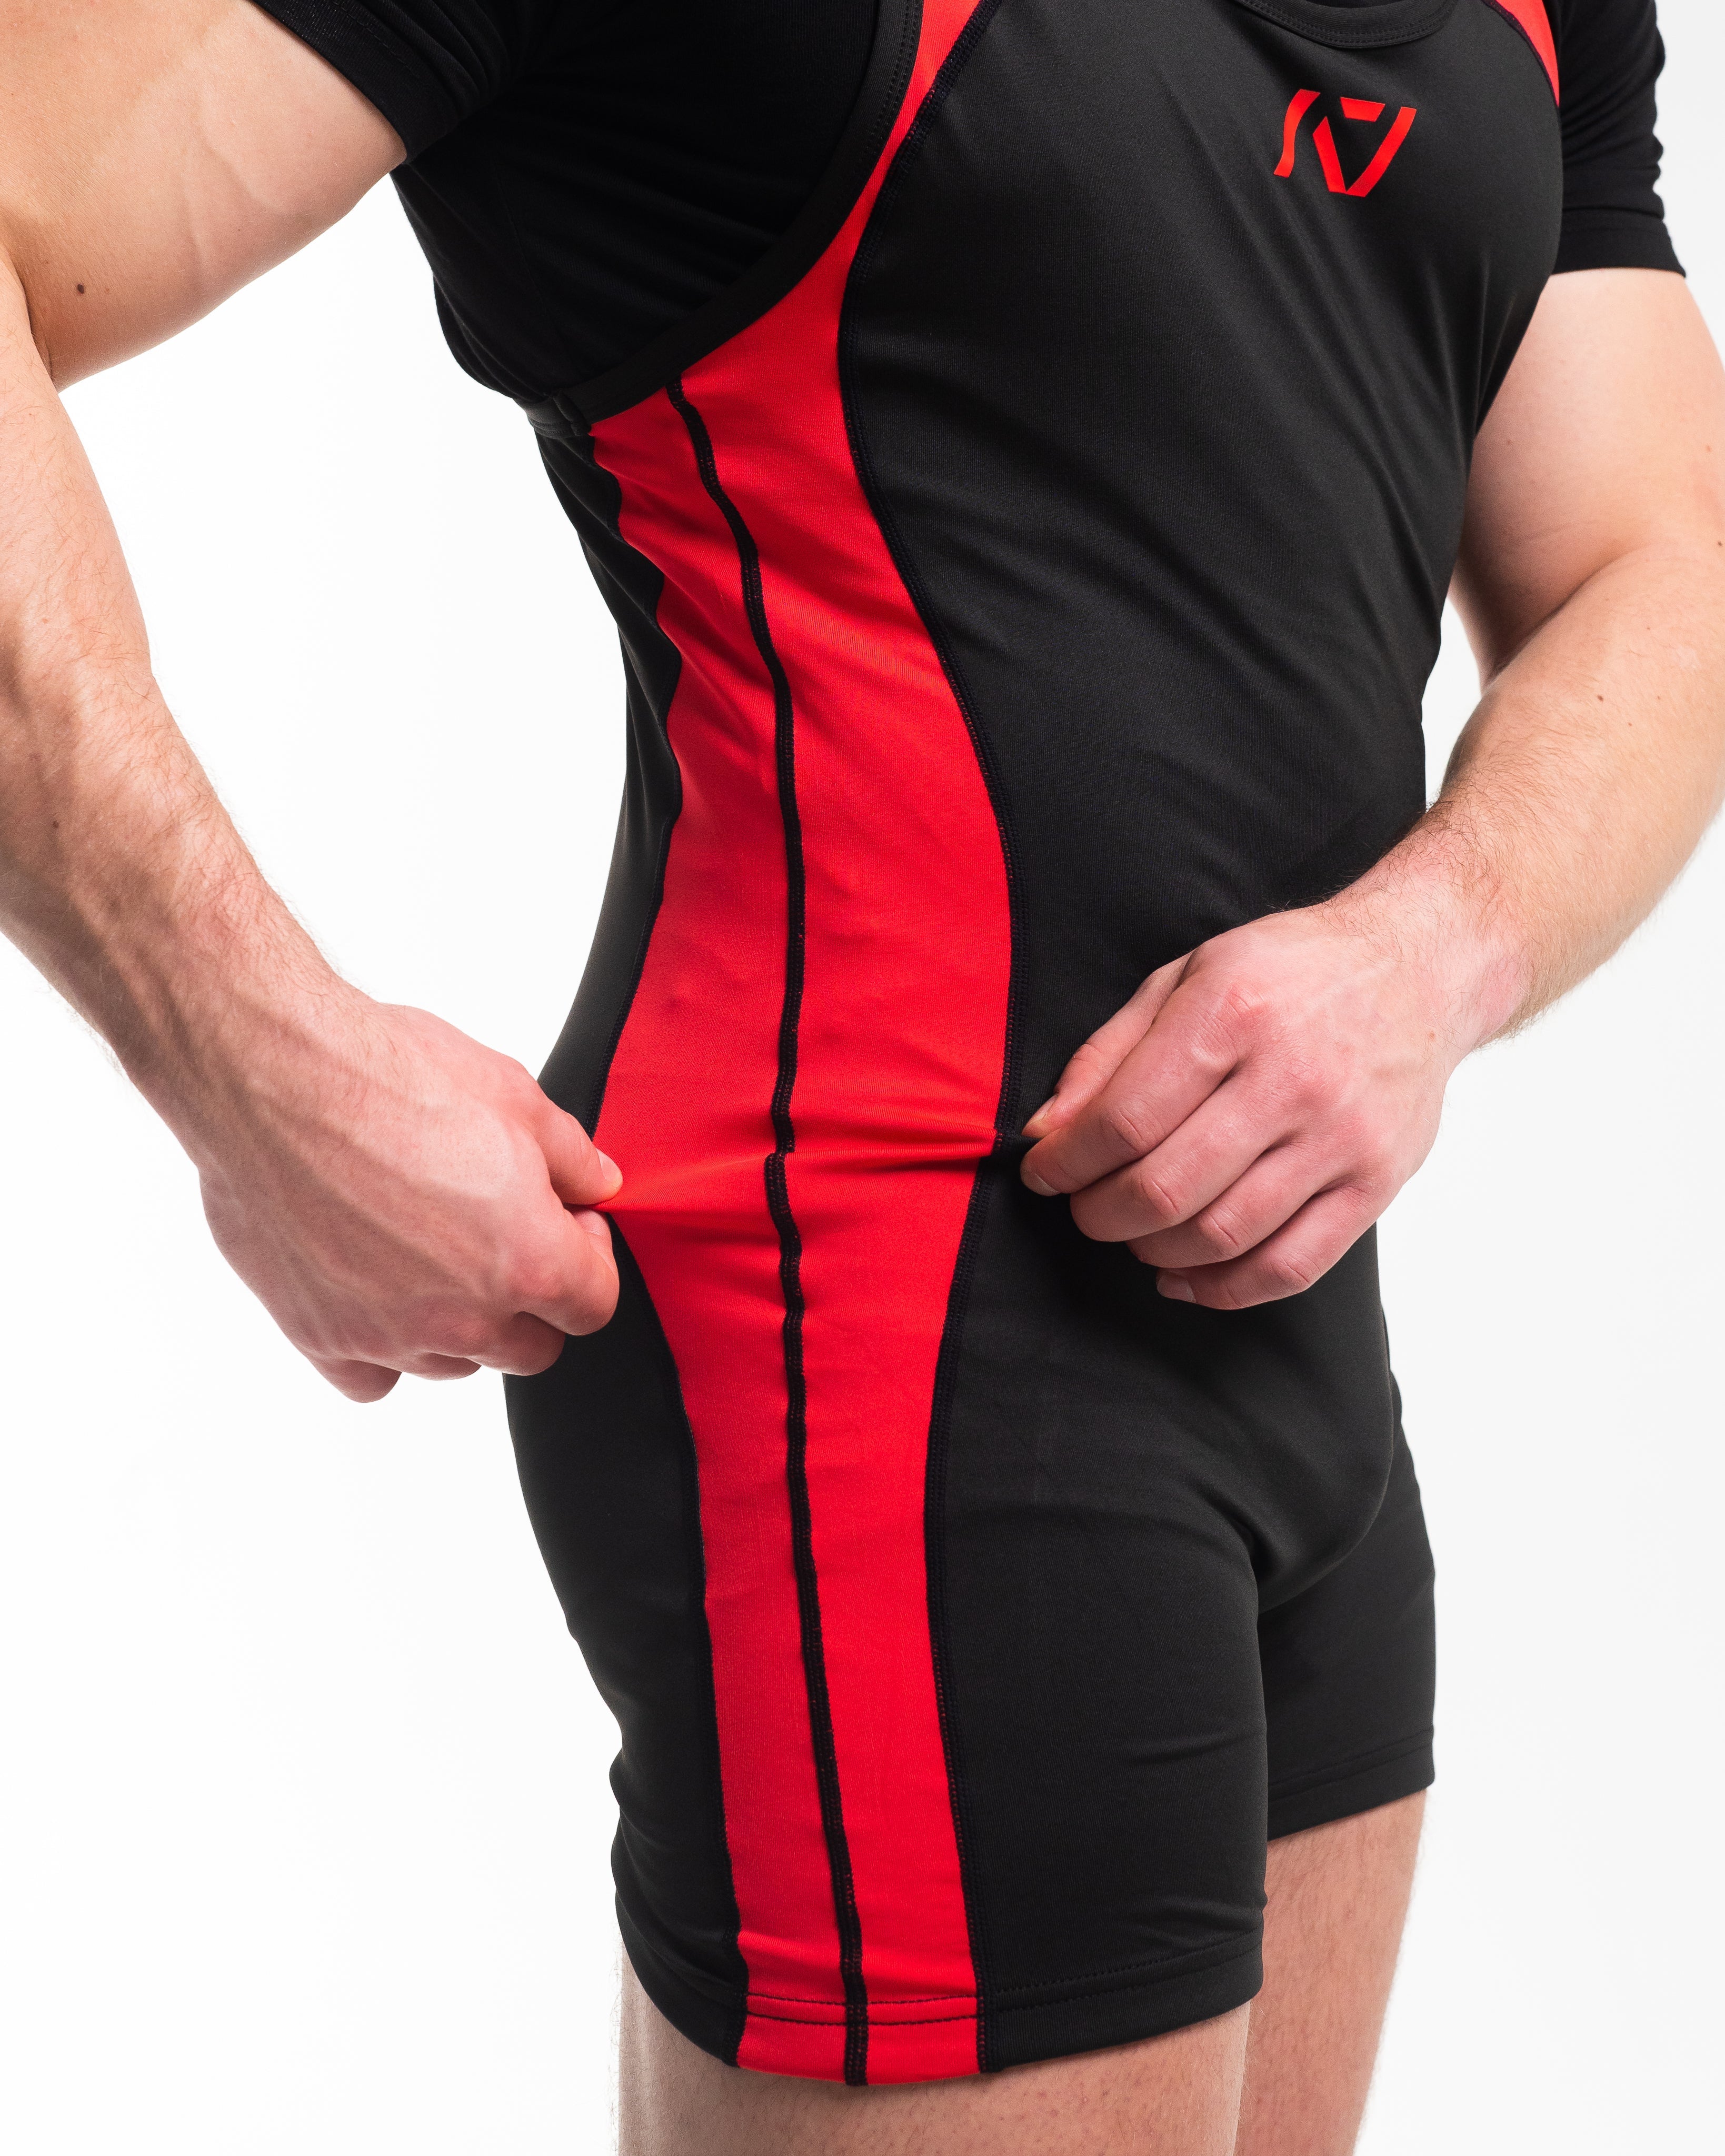 A7 IPF Approved Red Dawn Luno singlet features extra lat mobility, side panel stitching to guide the squat depth level and curved panel design for a slimming look. The Women's cut singlet features a tapered waist and additional quad room. The IPF Approved Kit includes Luno Powerlifting Singlet, A7 Meet Shirt, A7 Zebra Wrist Wraps, A7 Deadlift Socks, Hourglass Knee Sleeves (Stiff Knee Sleeves and Rigor Mortis Knee Sleeves). All A7 Powerlifting Equipment shipping to UK, Norway, Switzerland and Iceland.